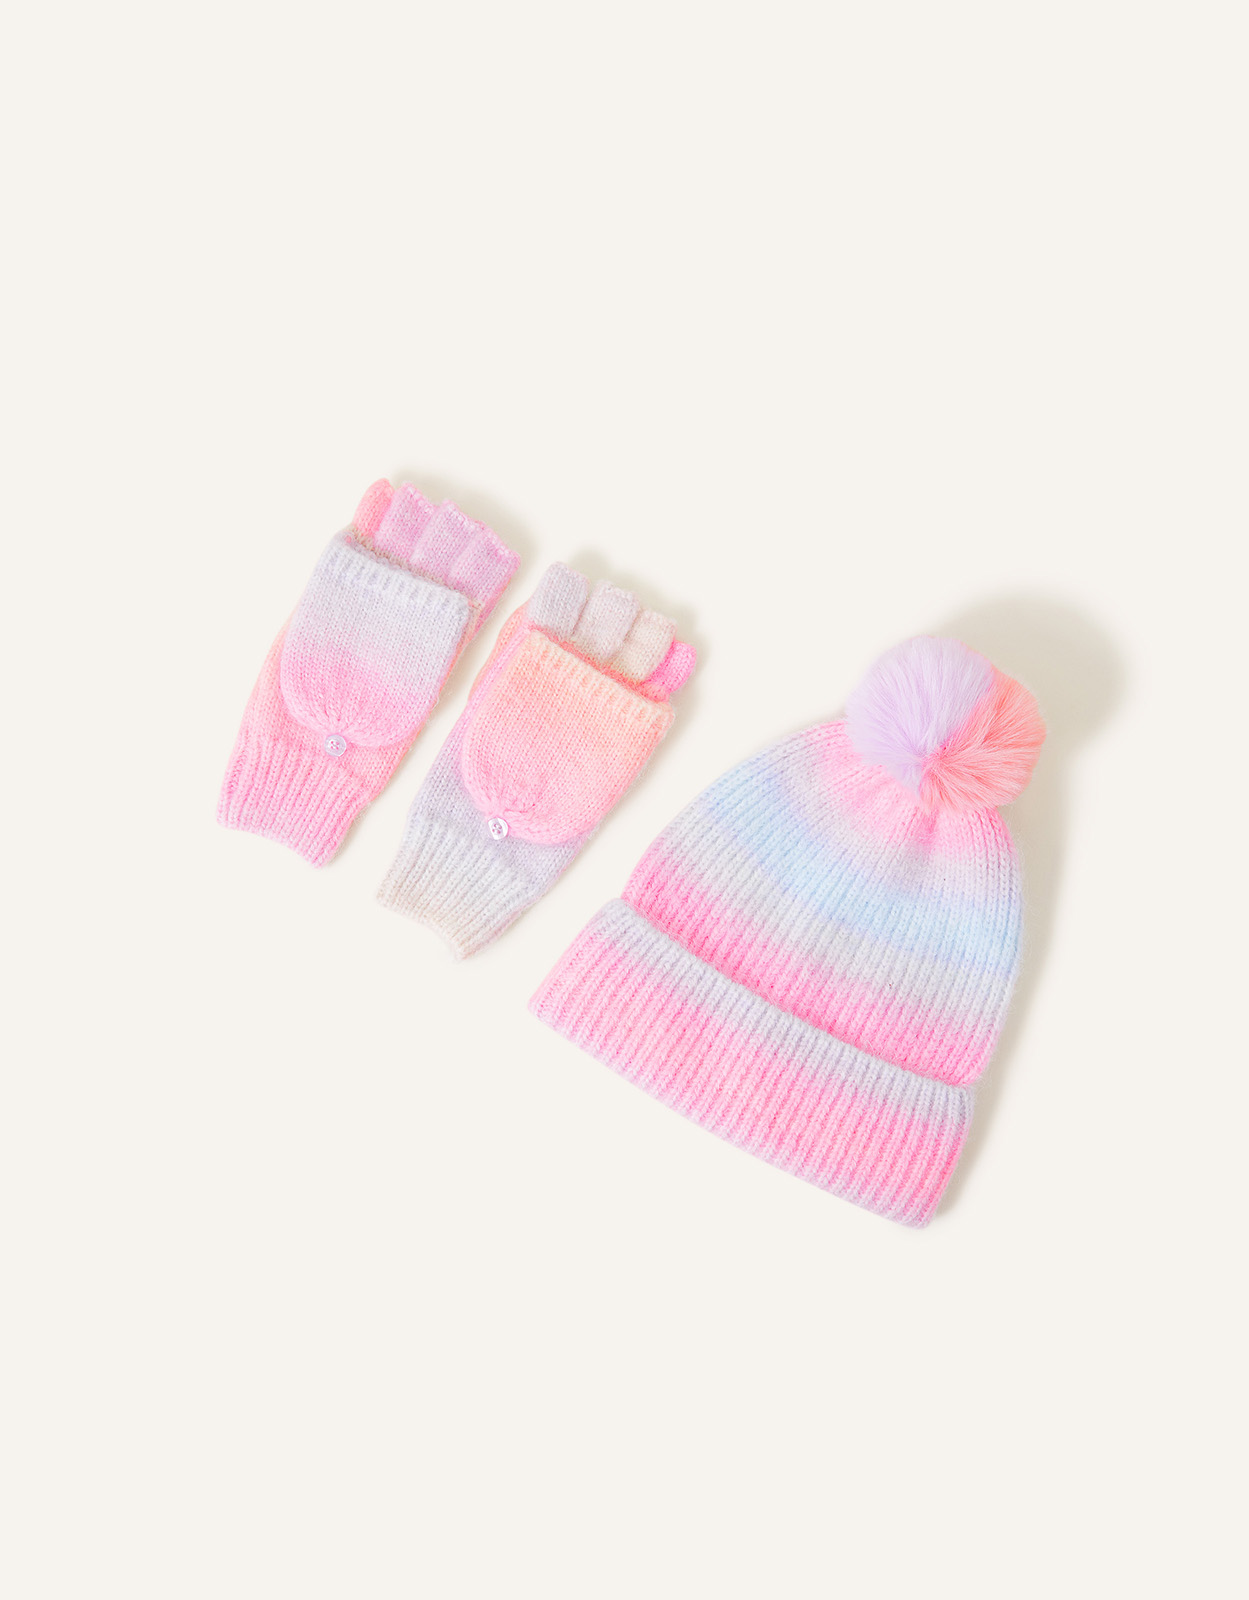 Accessorize Little Girl's Girls Rainbow Hat and Gloves Set Multi, Size: 3-6 yrs